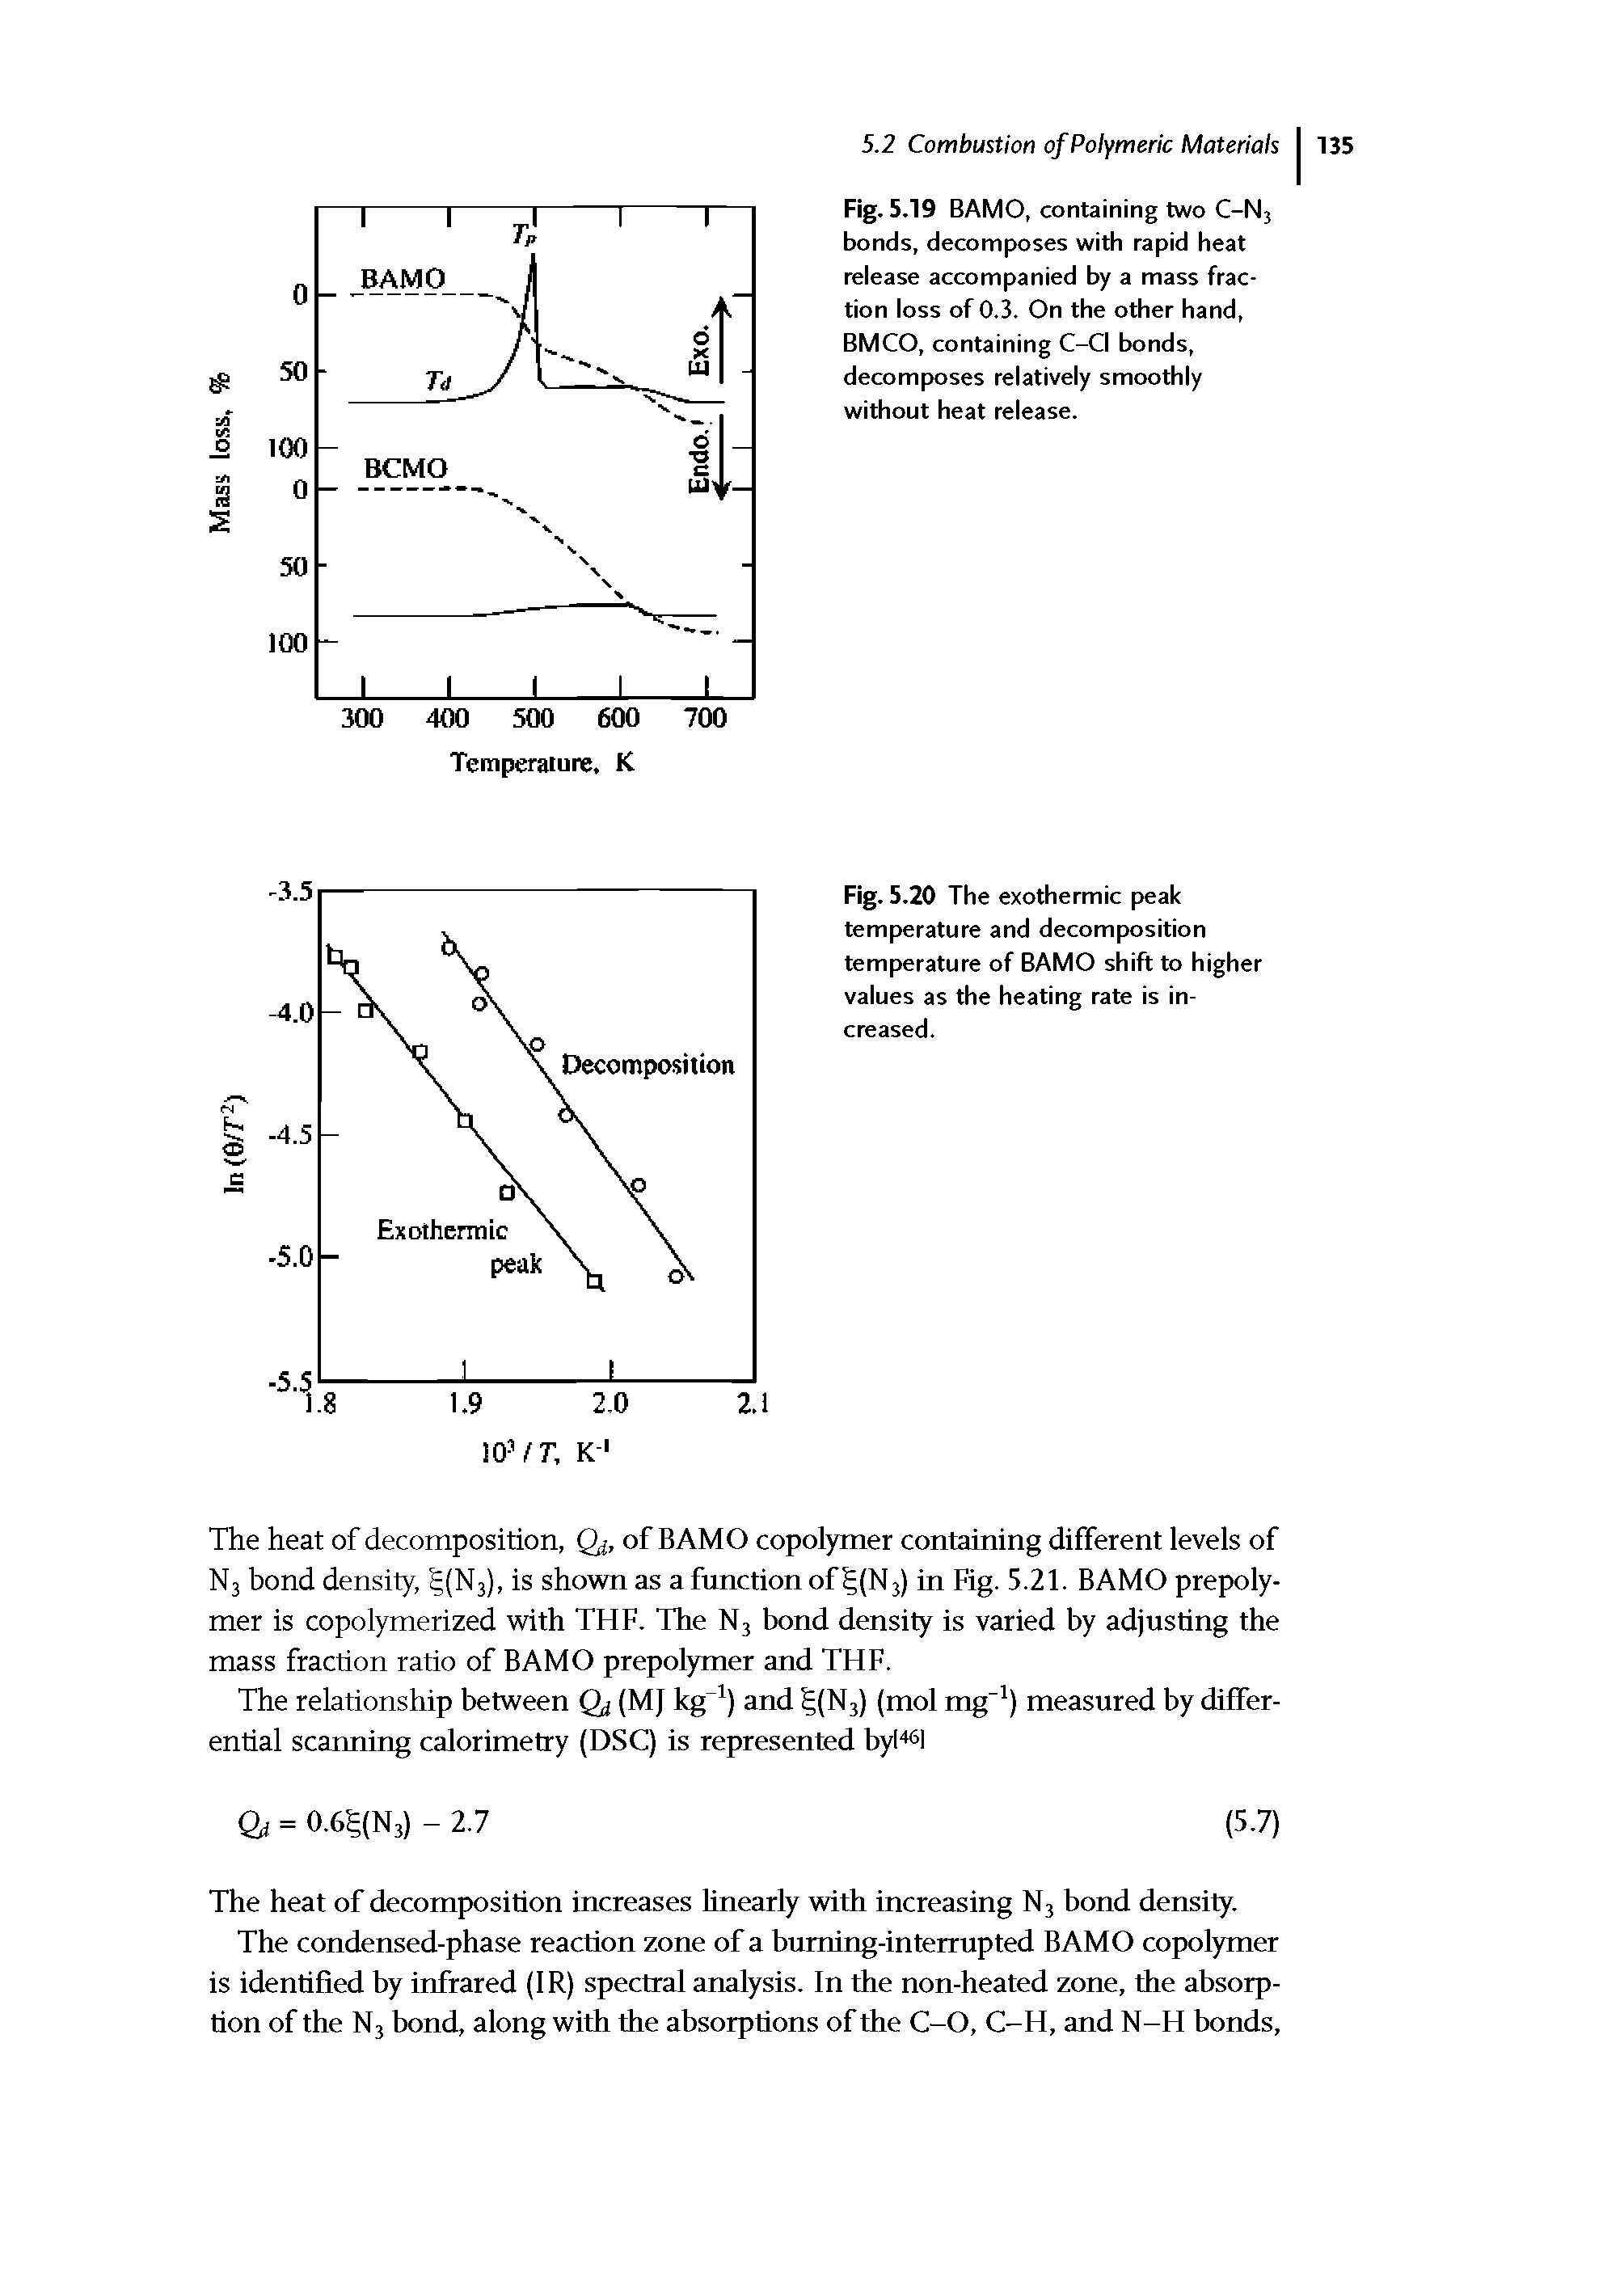 Fig. 5.20 The exothermic peak temperature and decomposition temperature of BAMO shift to higher values as the heating rate is increased.